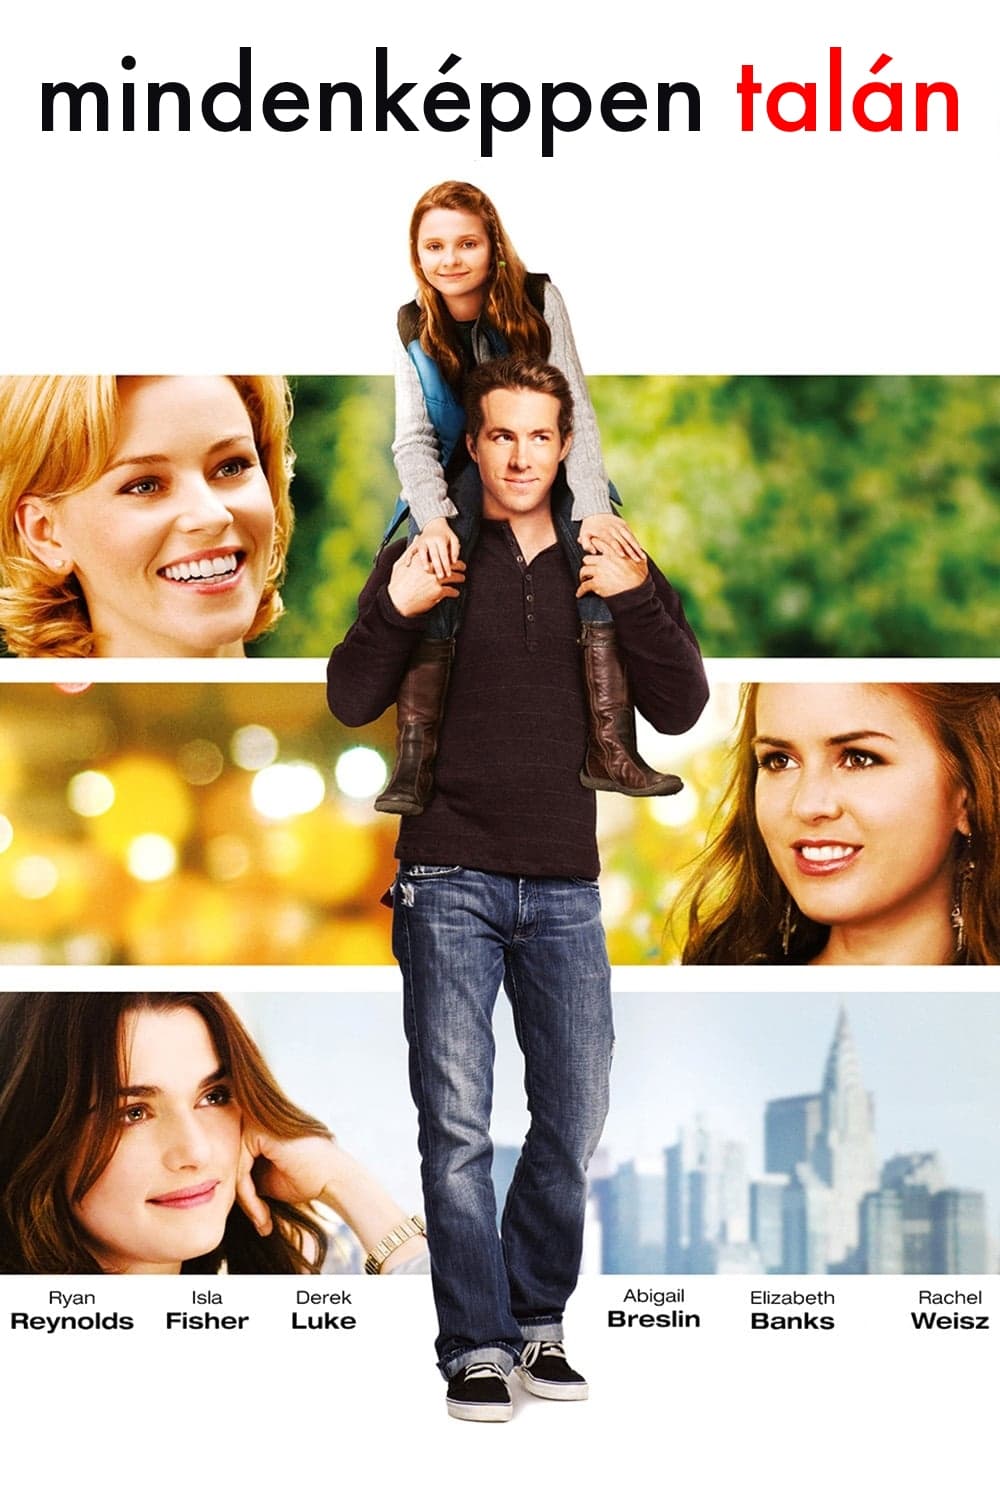 Poster and image movie Definitely, Maybe